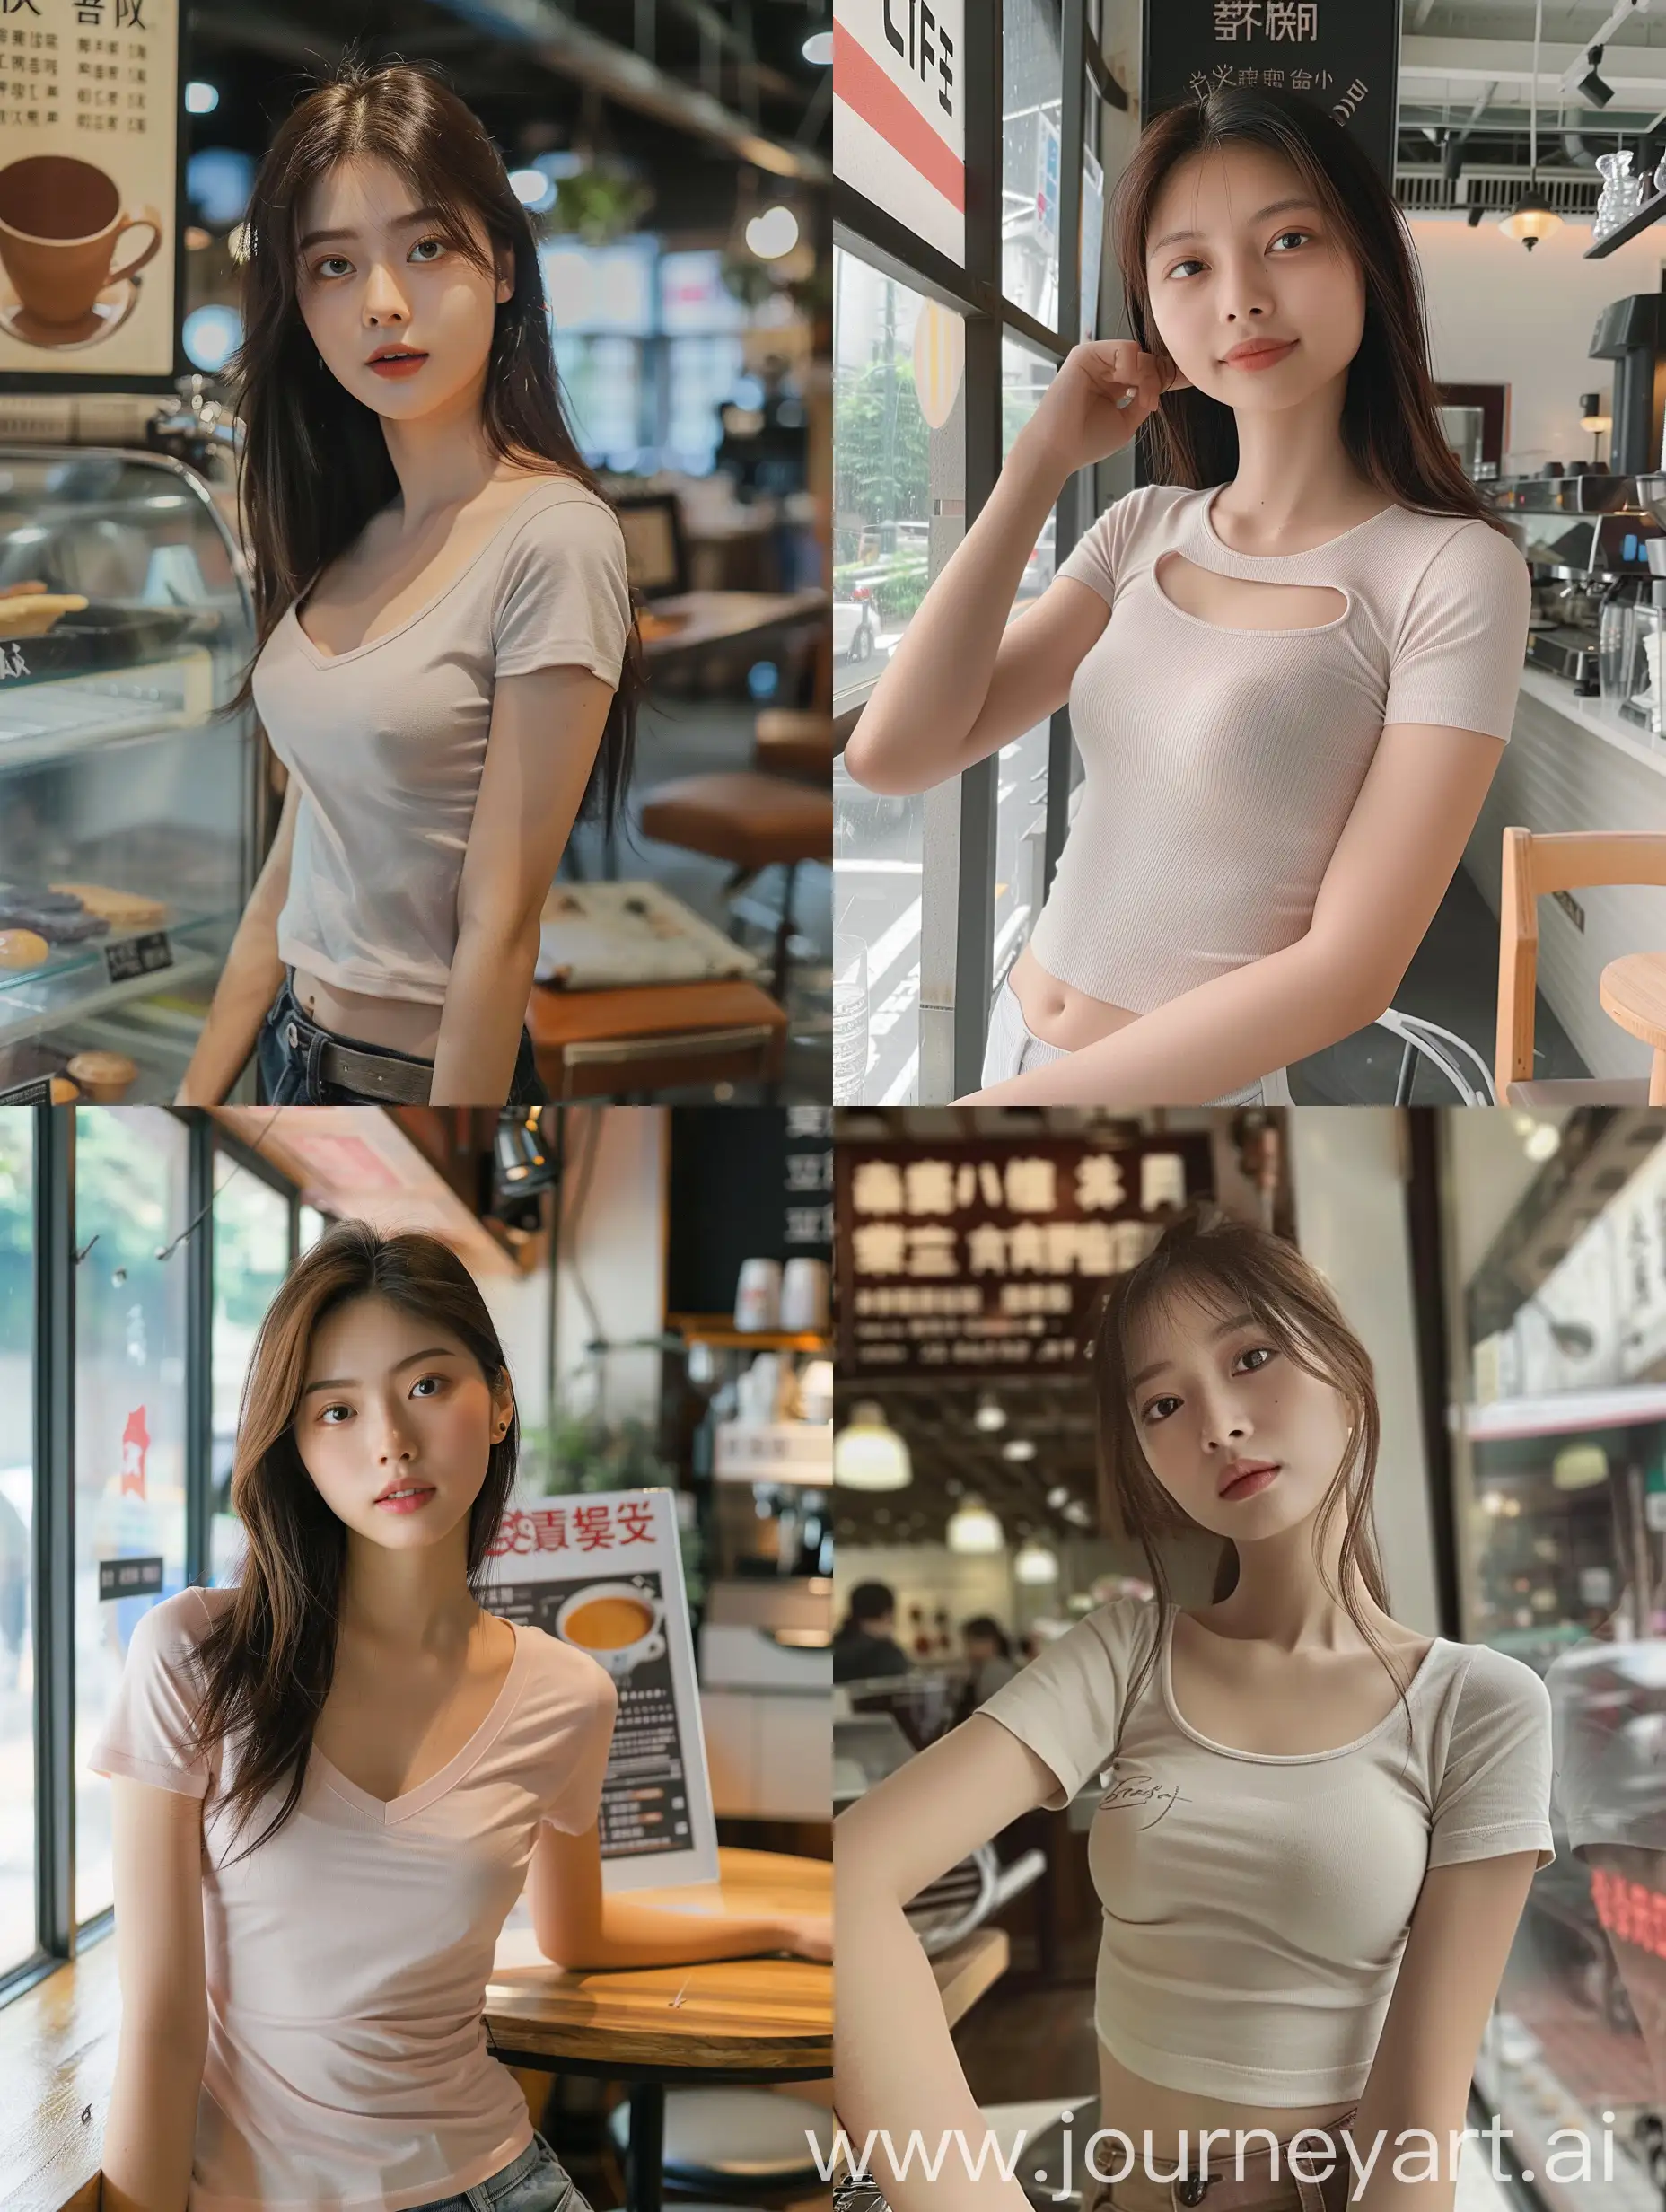 Cute 25 year old Taiwanese girl wearing a plain muted white colored tight T-shirt with a low neckline, posing for a photo in a coffee shop next to a sign